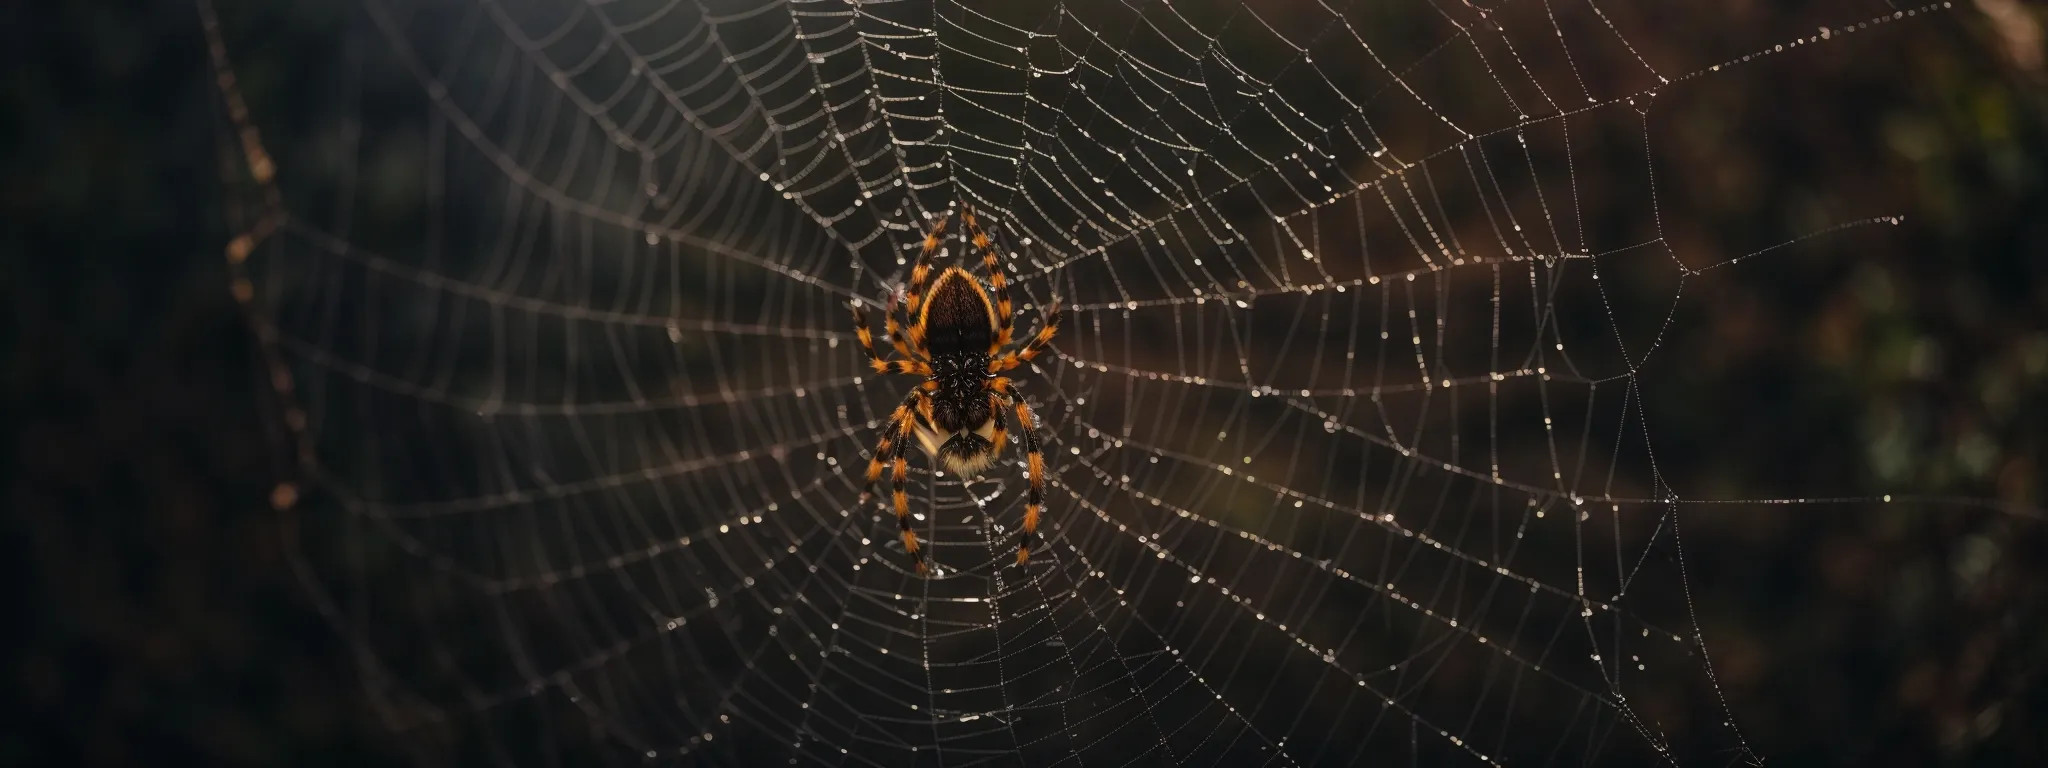 a spider weaving an intricate web, symbolizing the nuanced structure of internal seo linking strategies.